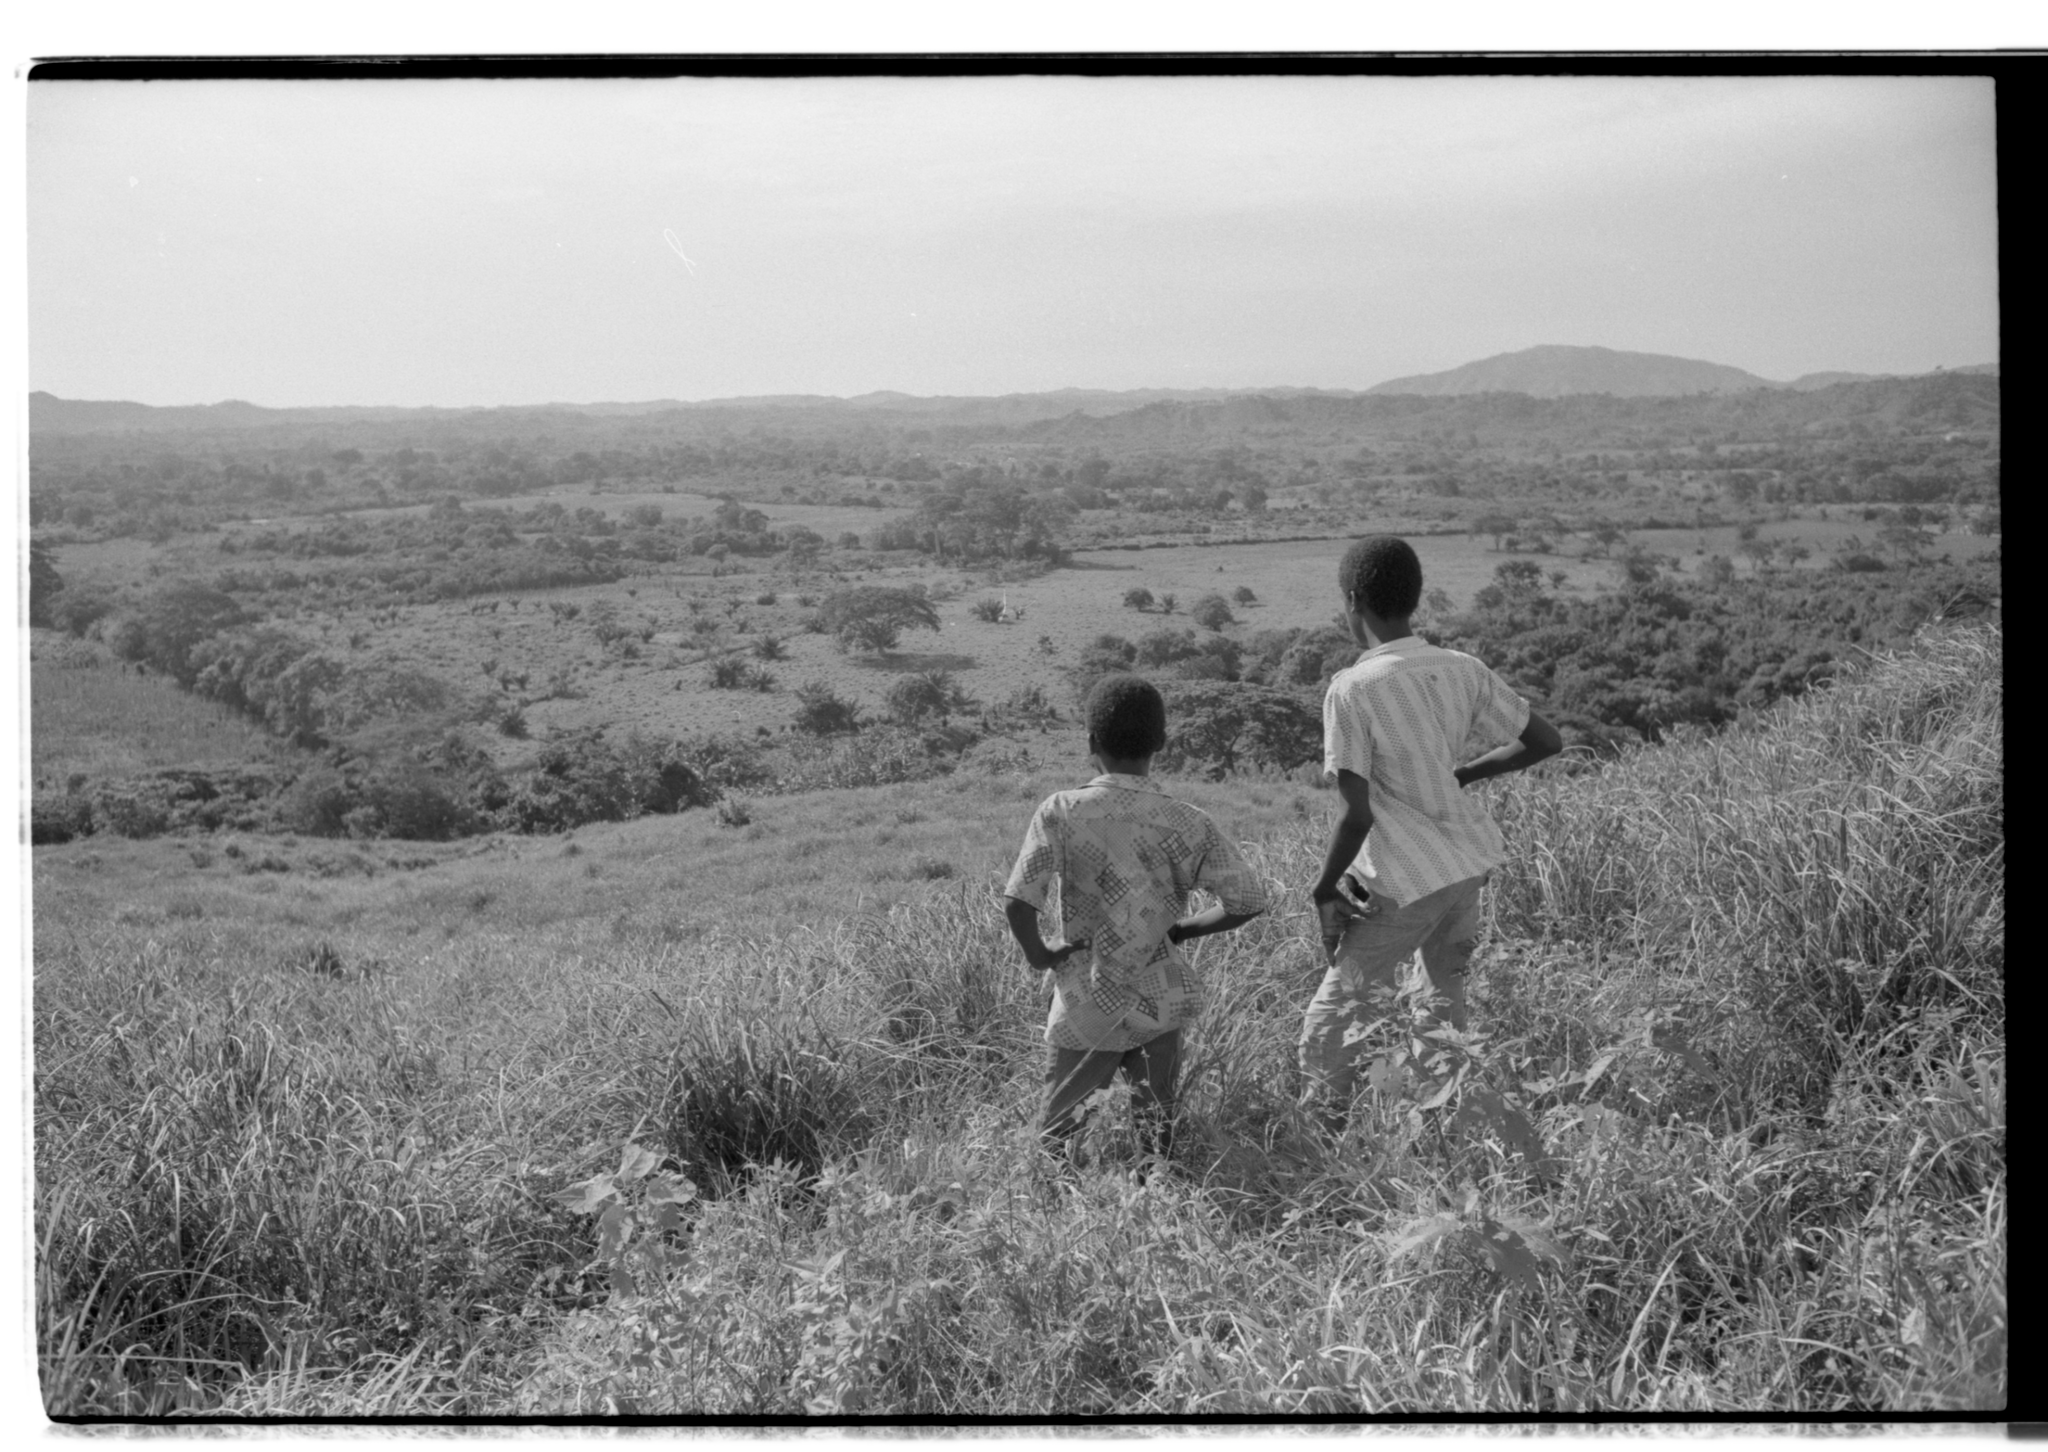 Two people staring into the landscape in black and white